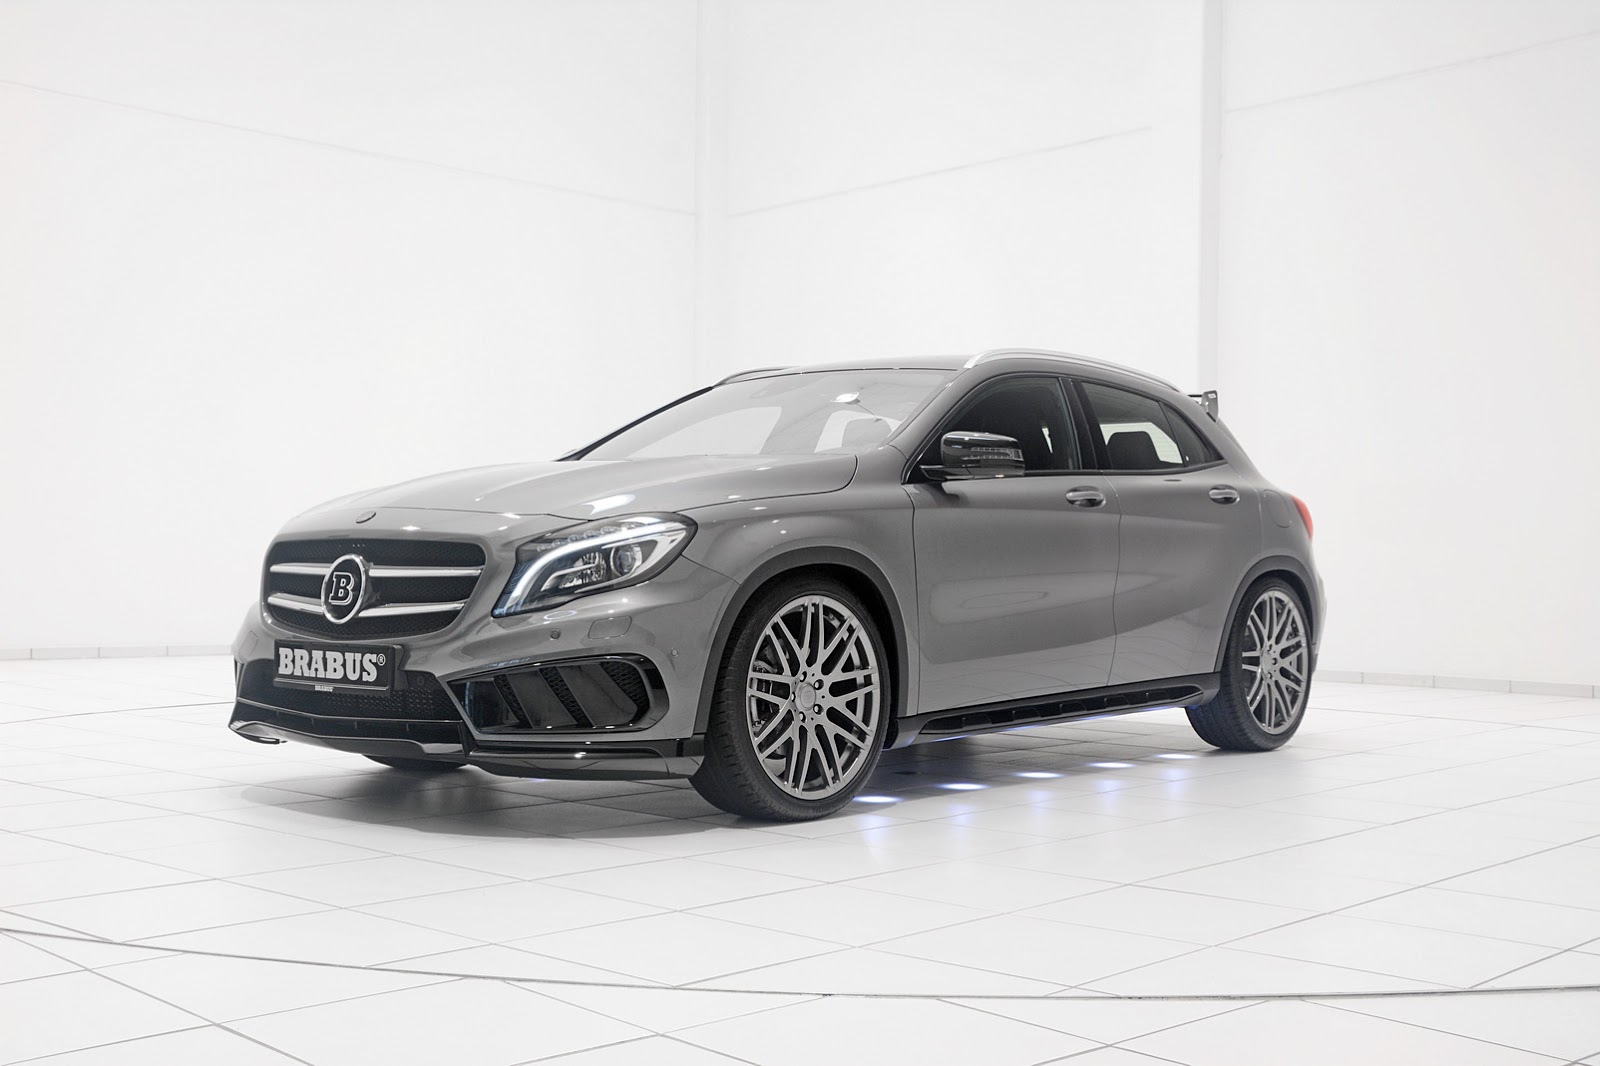 400PS Brabus Mercedes GLA 45 AMG is Our Kind of Small SUV